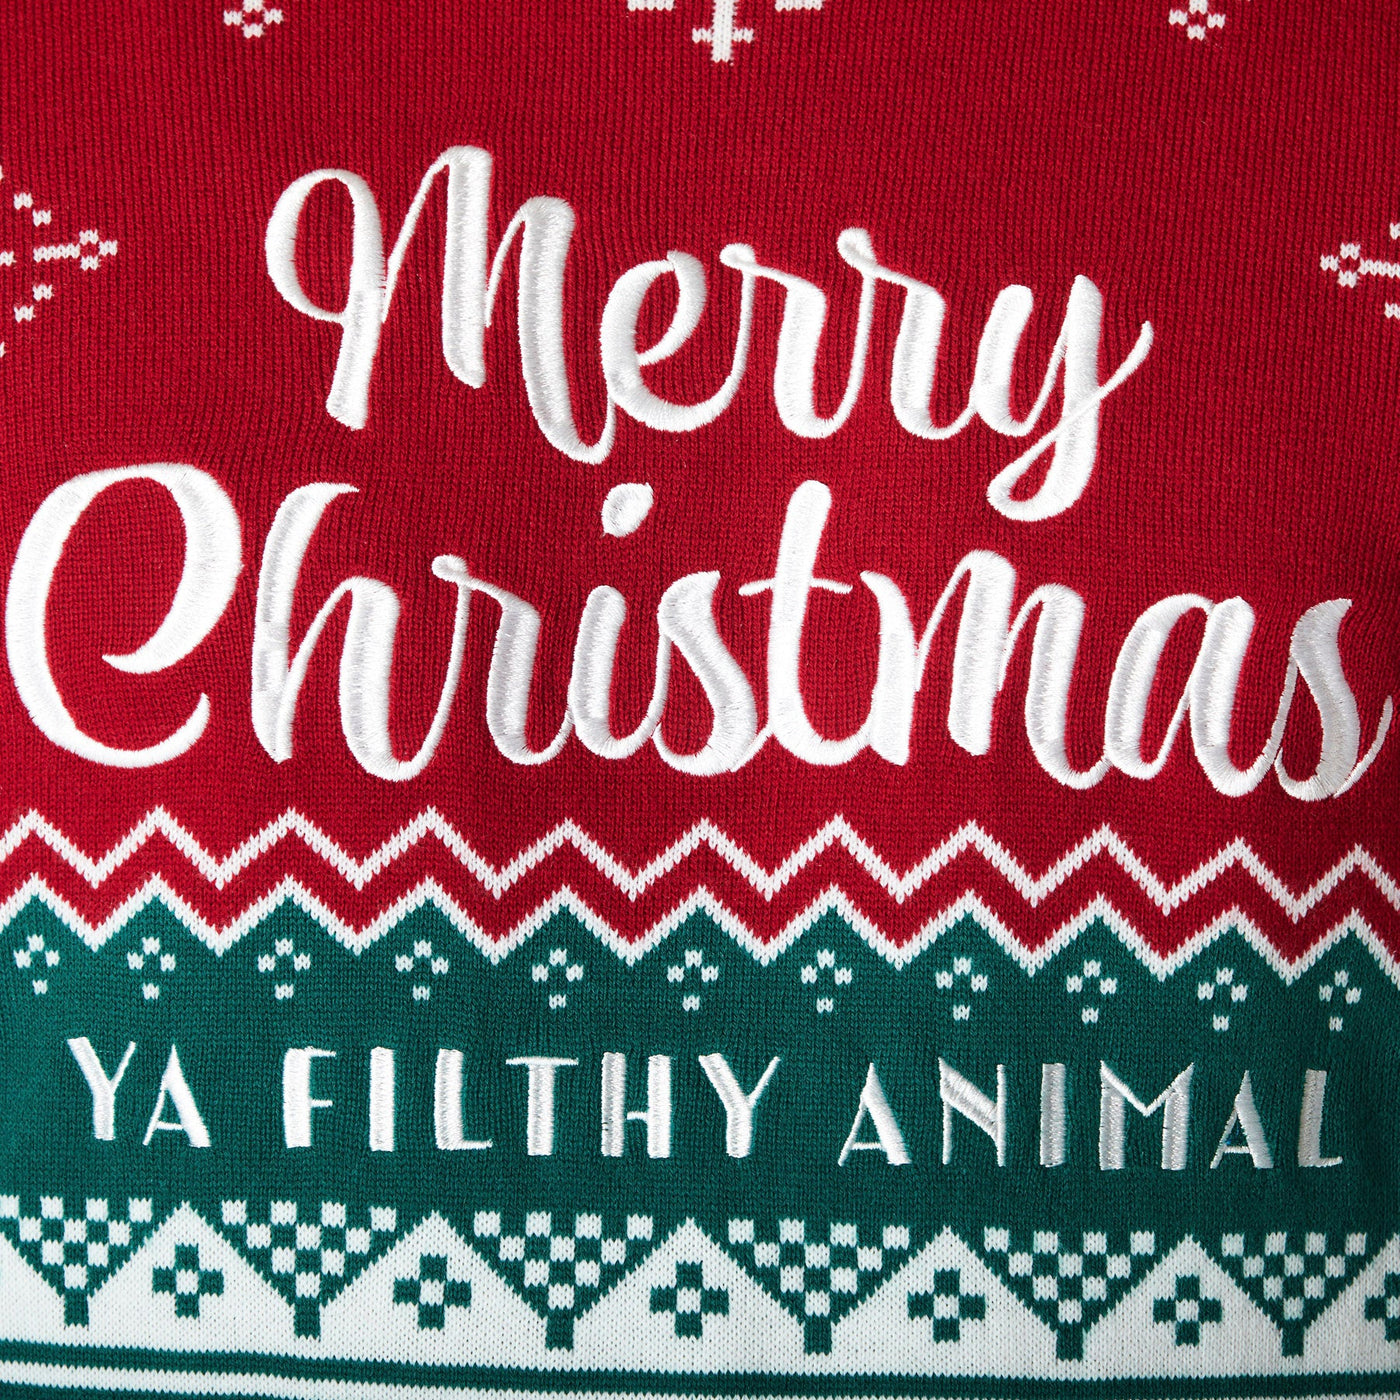 Men's Filthy Animal Christmas Sweater